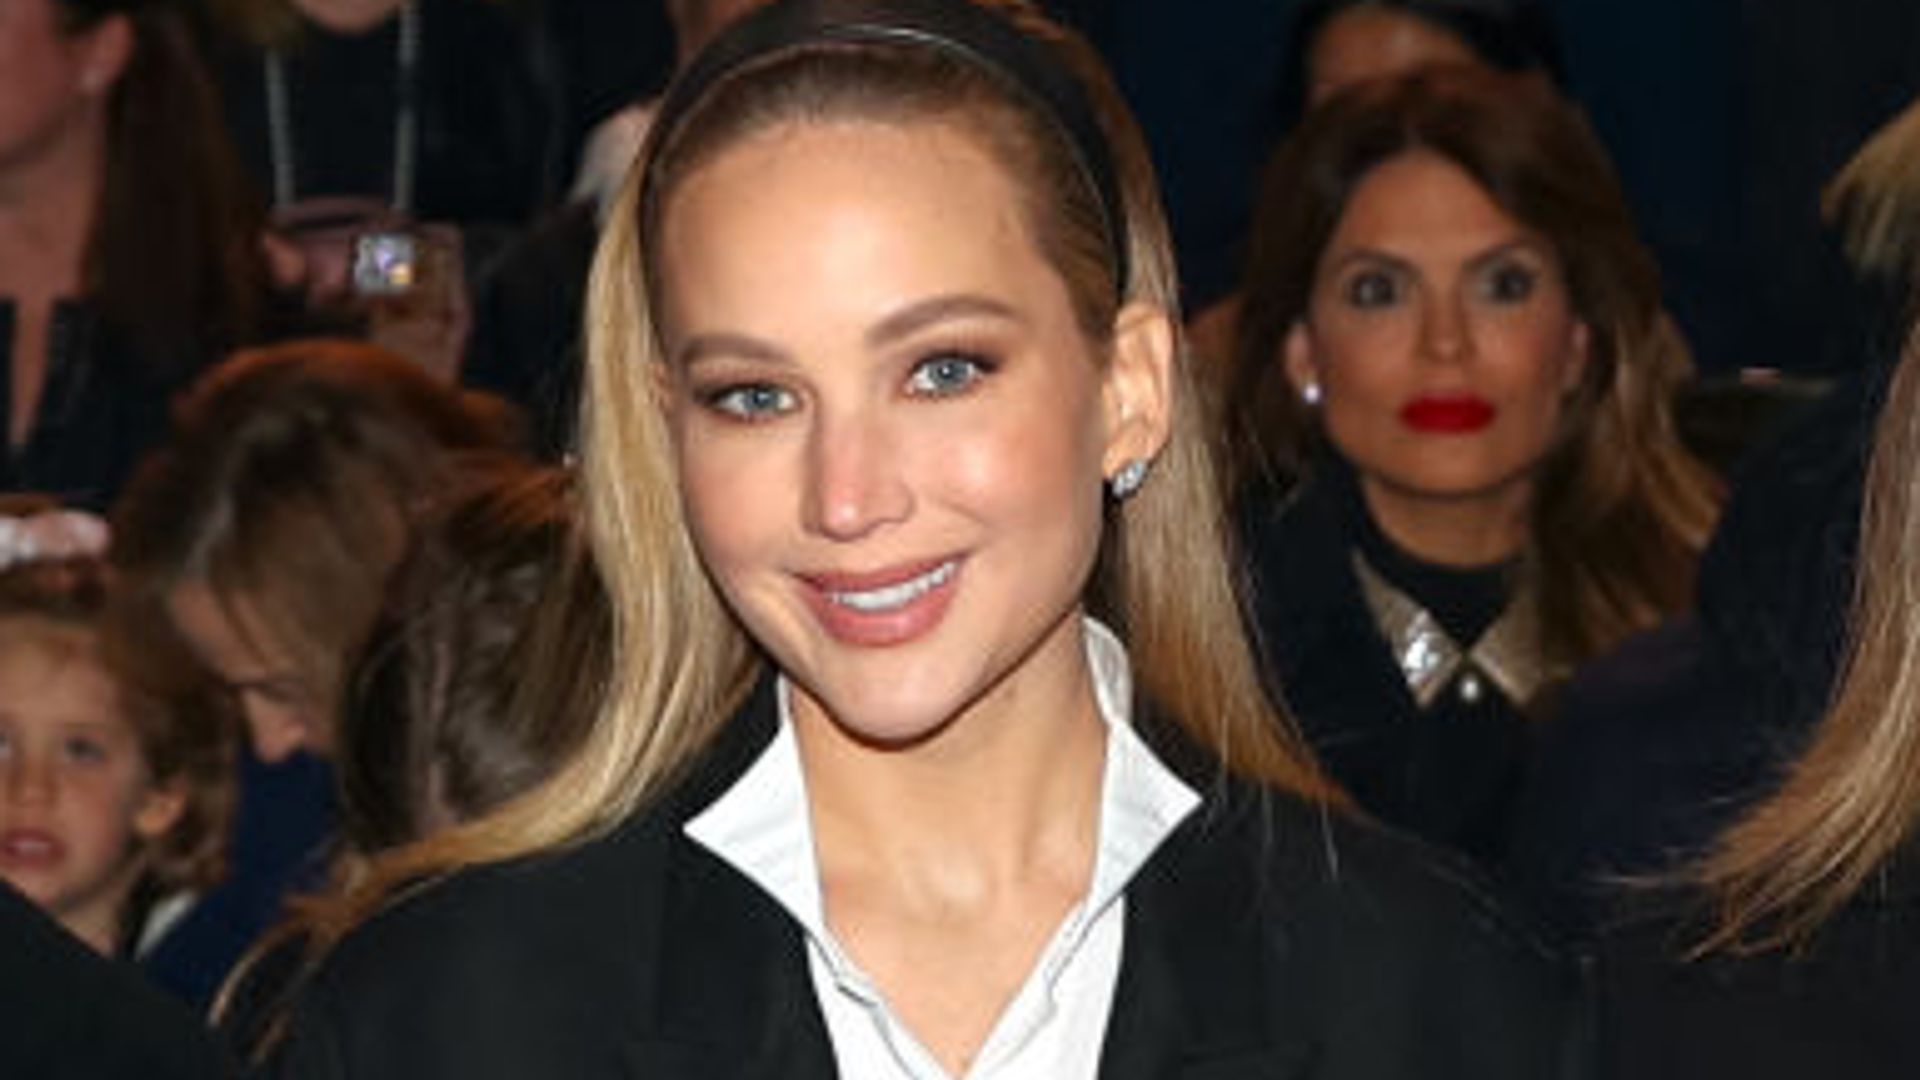 Jennifer Lawrence suffers wardrobe malfunction during live event - and her reaction is priceless